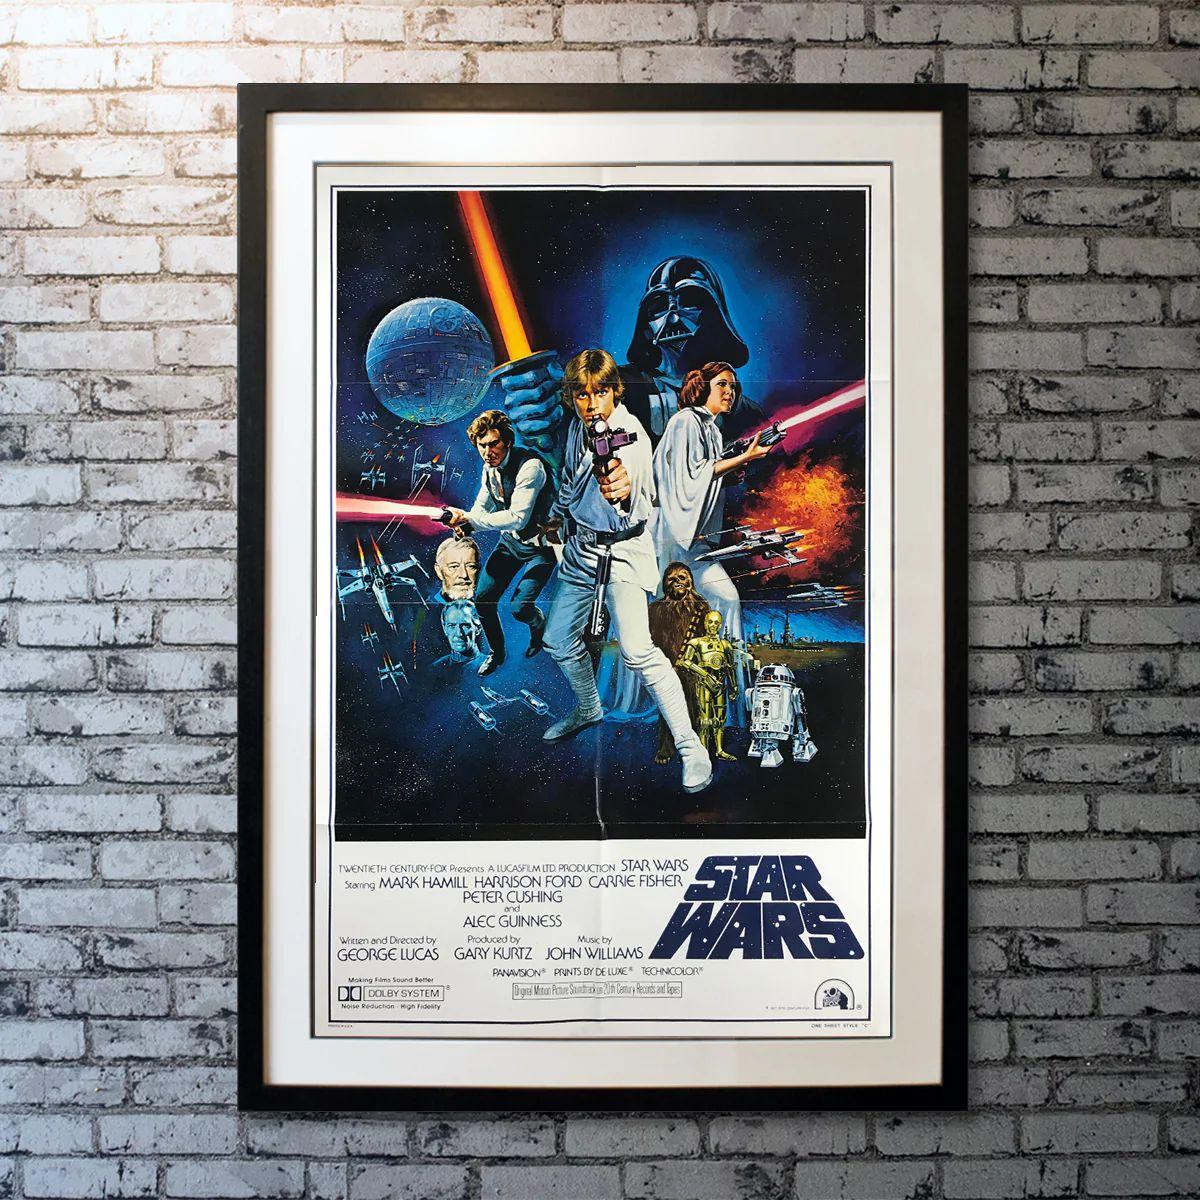 Star Wars, Unframed Poster, 1977

Original One Sheet (27 X 41 Inches). Luke Skywalker joins forces with a Jedi Knight, a cocky pilot, a Wookiee and two droids to save the galaxy from the Empire's world-destroying battle station, while also